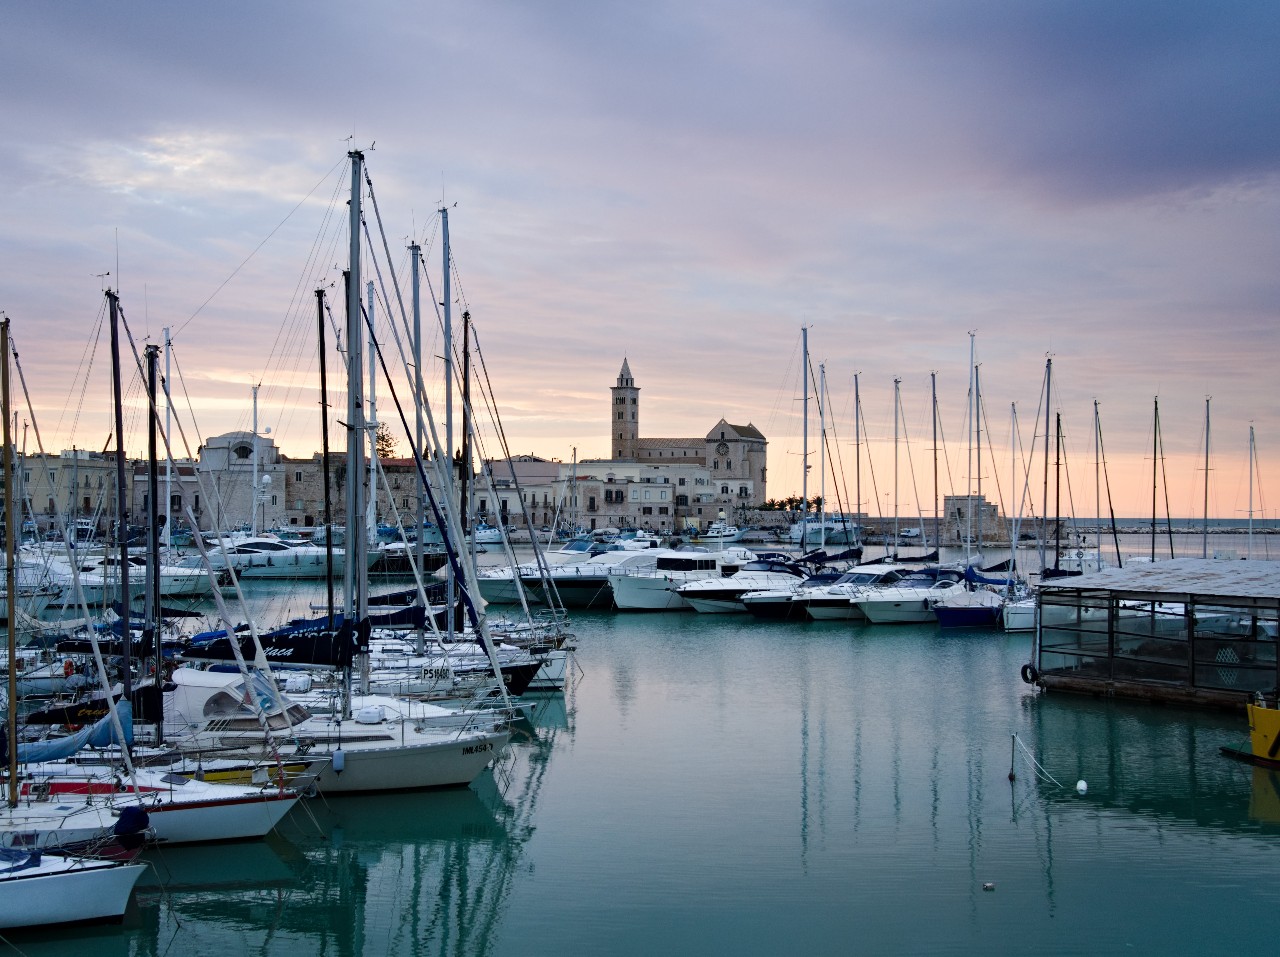 Cathedral of Trani - Photo by Diego Geraldi